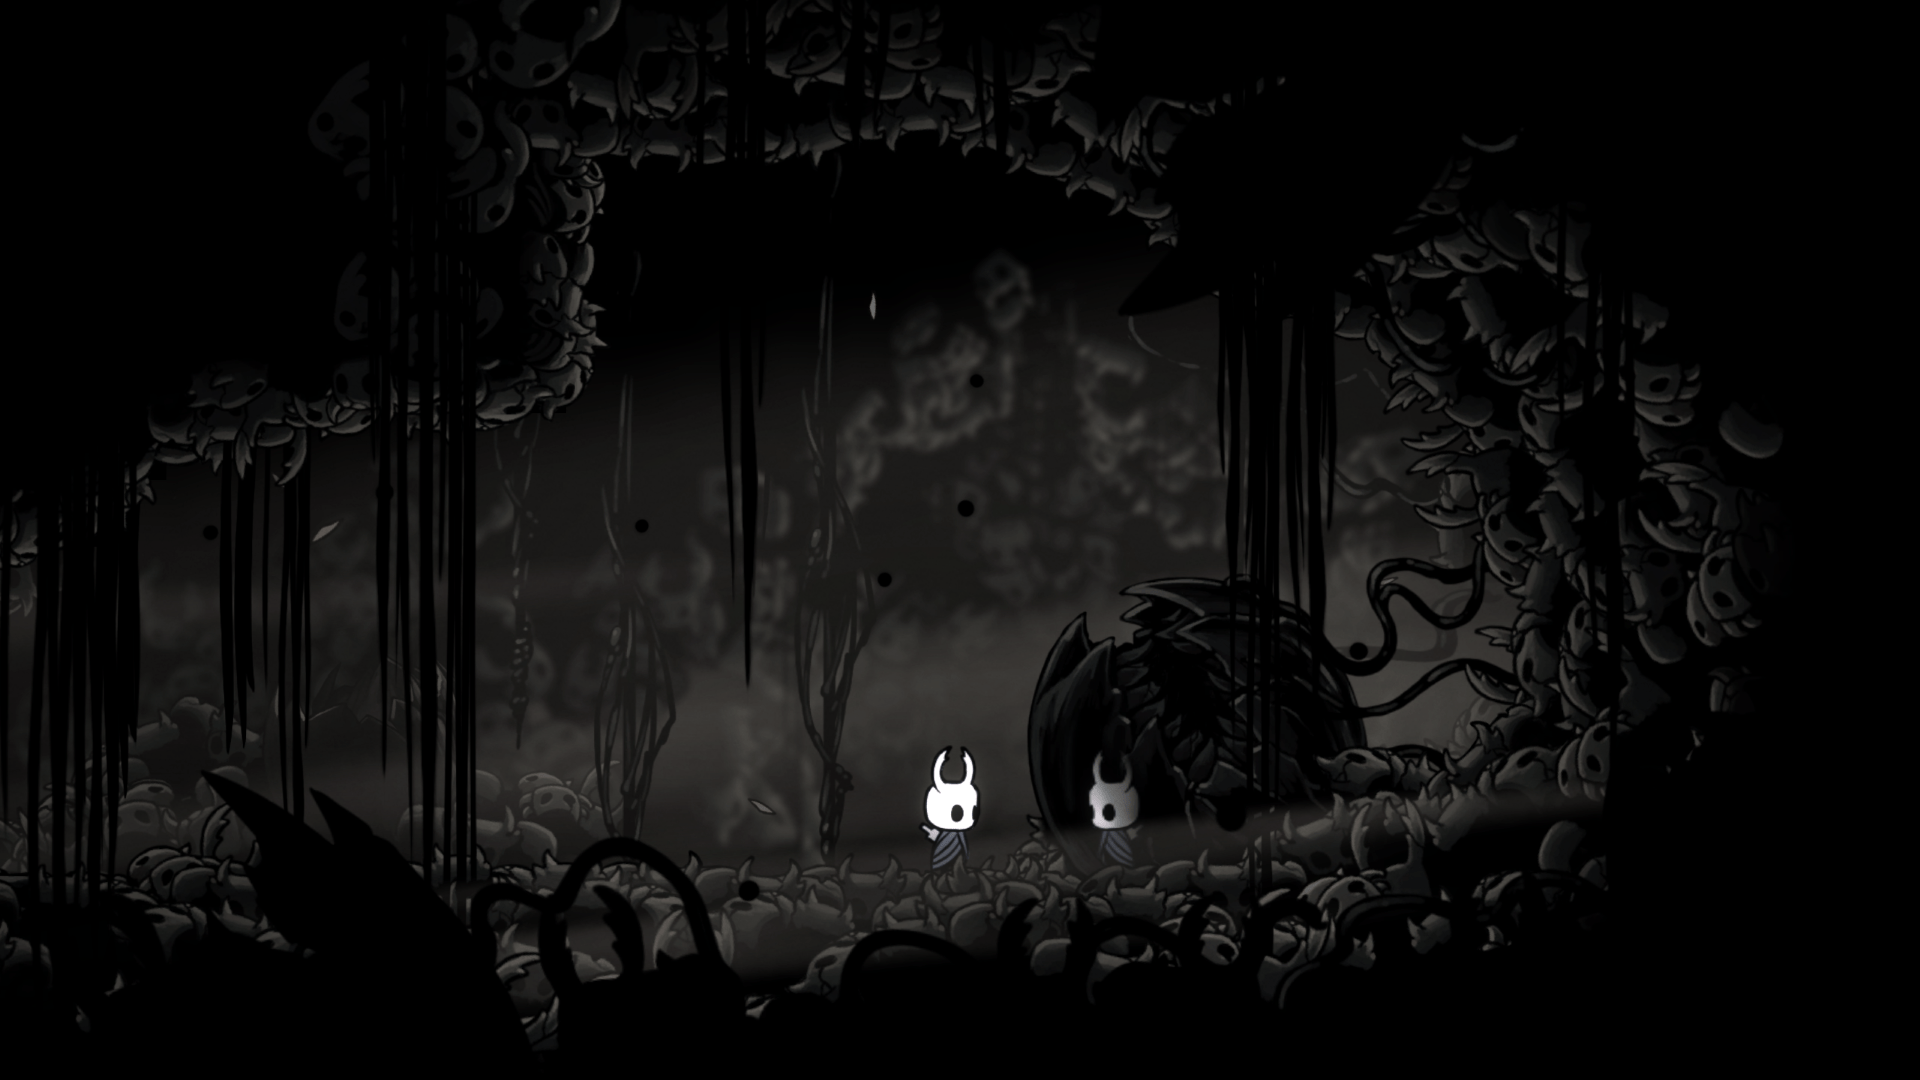 HOLLOW KNIGHT: A journey through the ruins of an ancient kingdom